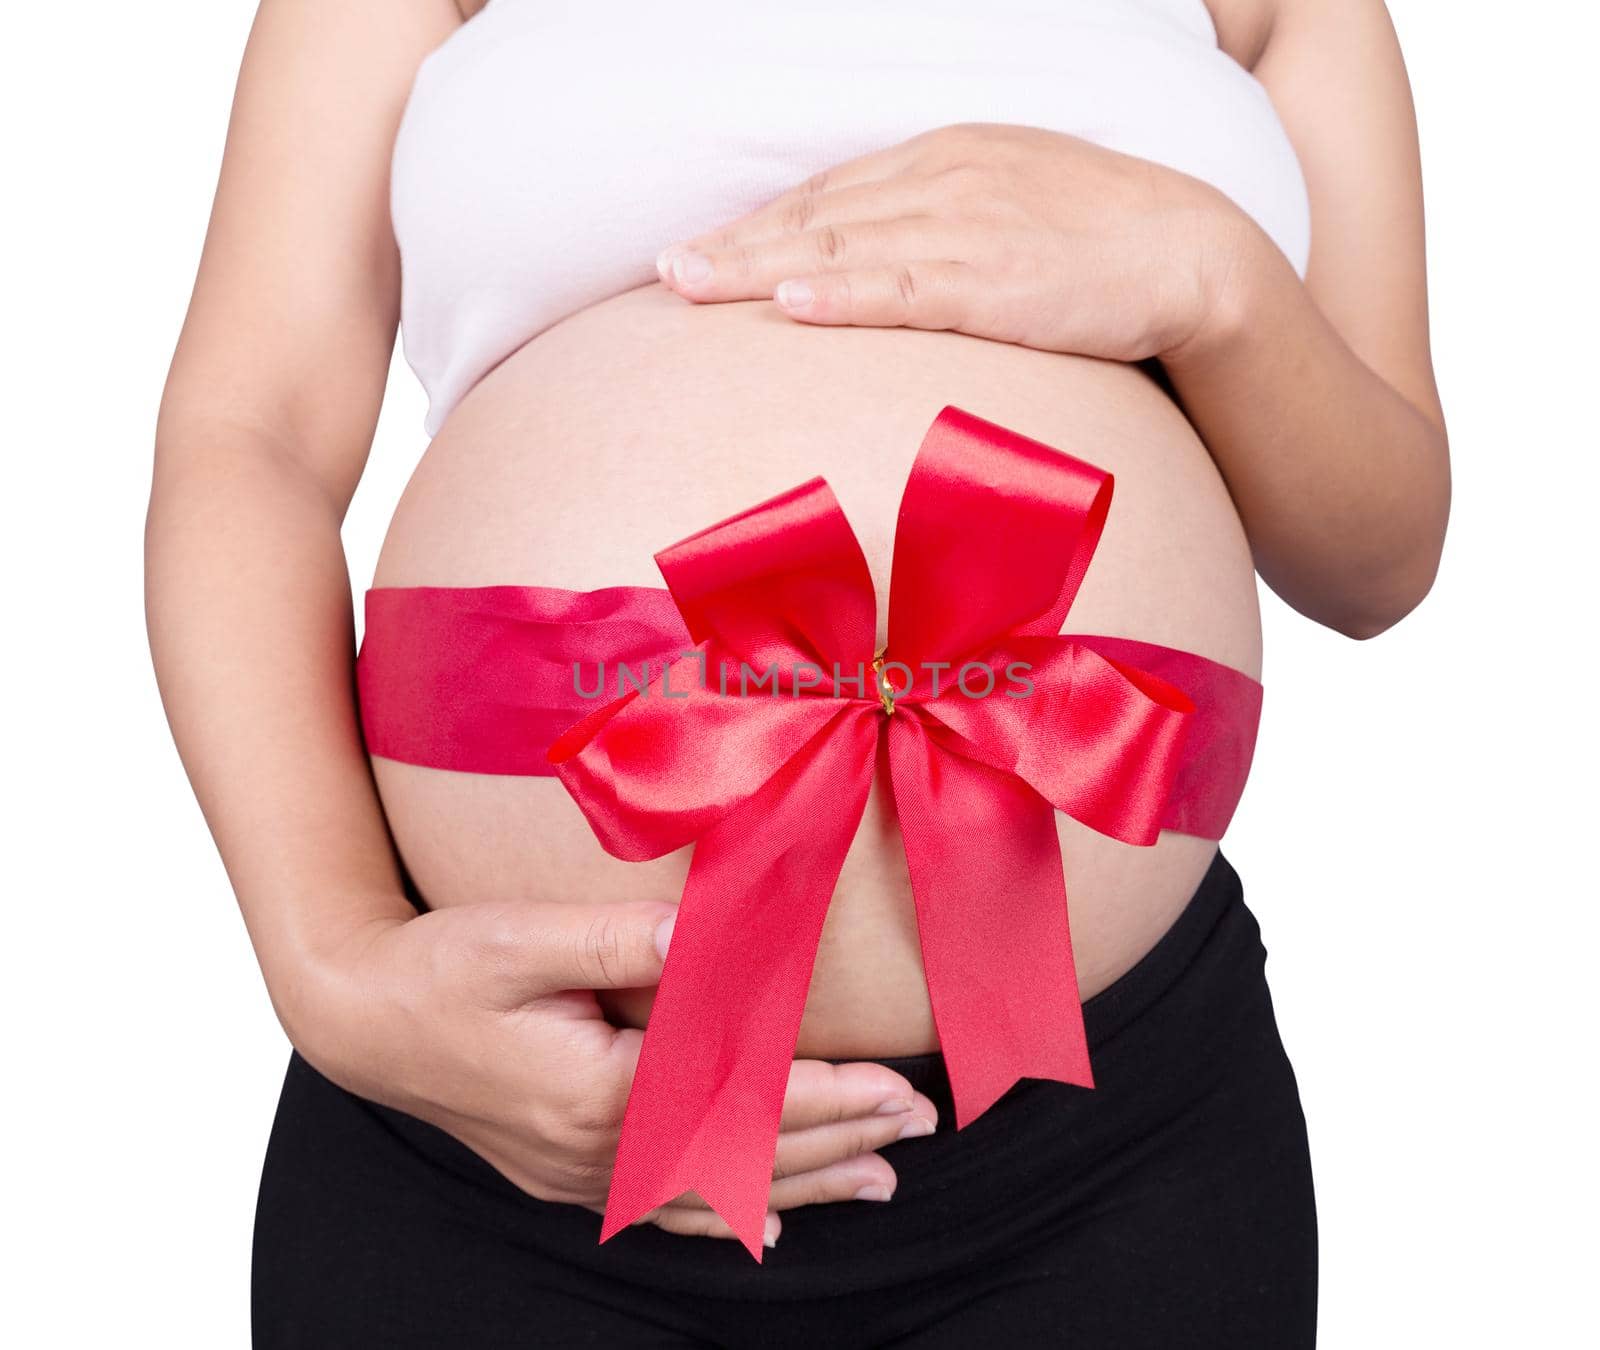 close up pregnant woman with red ribbon gift on belly isolated on white background